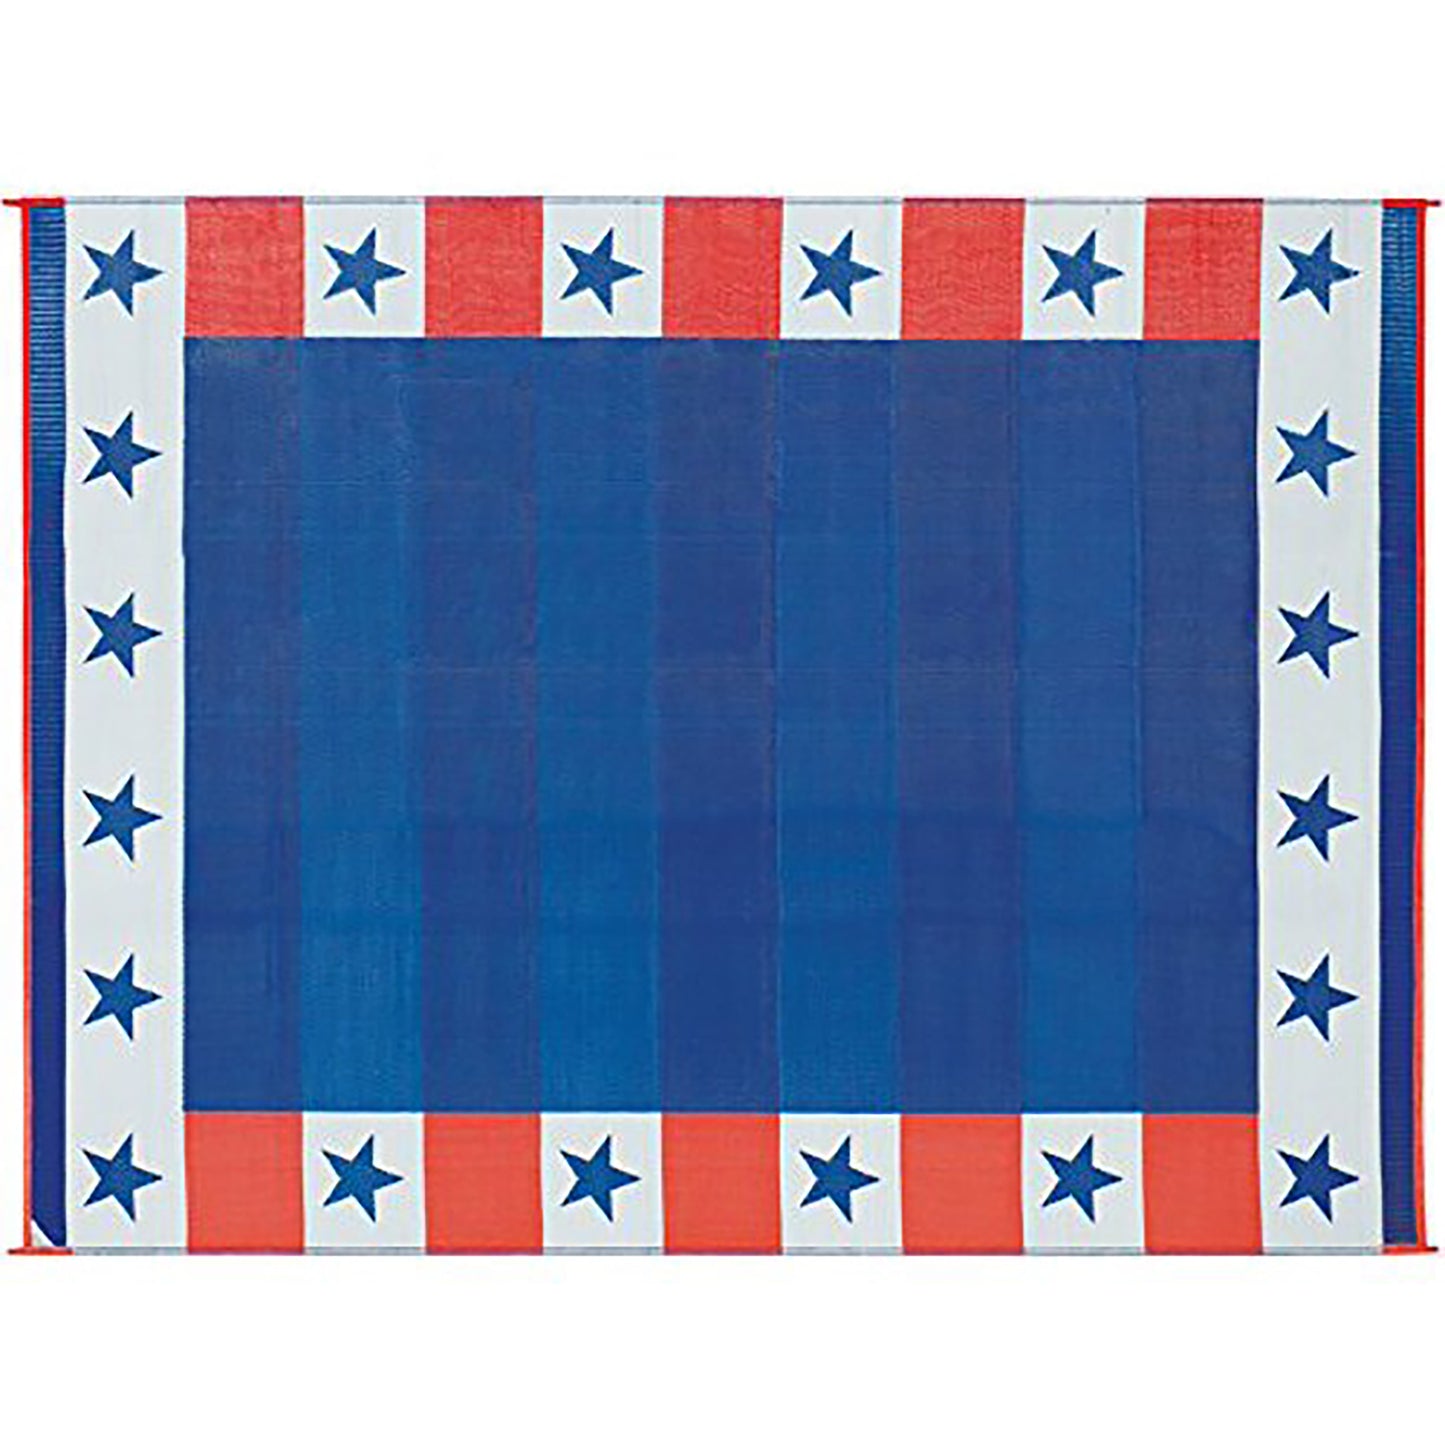 Patio Mat- 16x8' Independence Day Theme